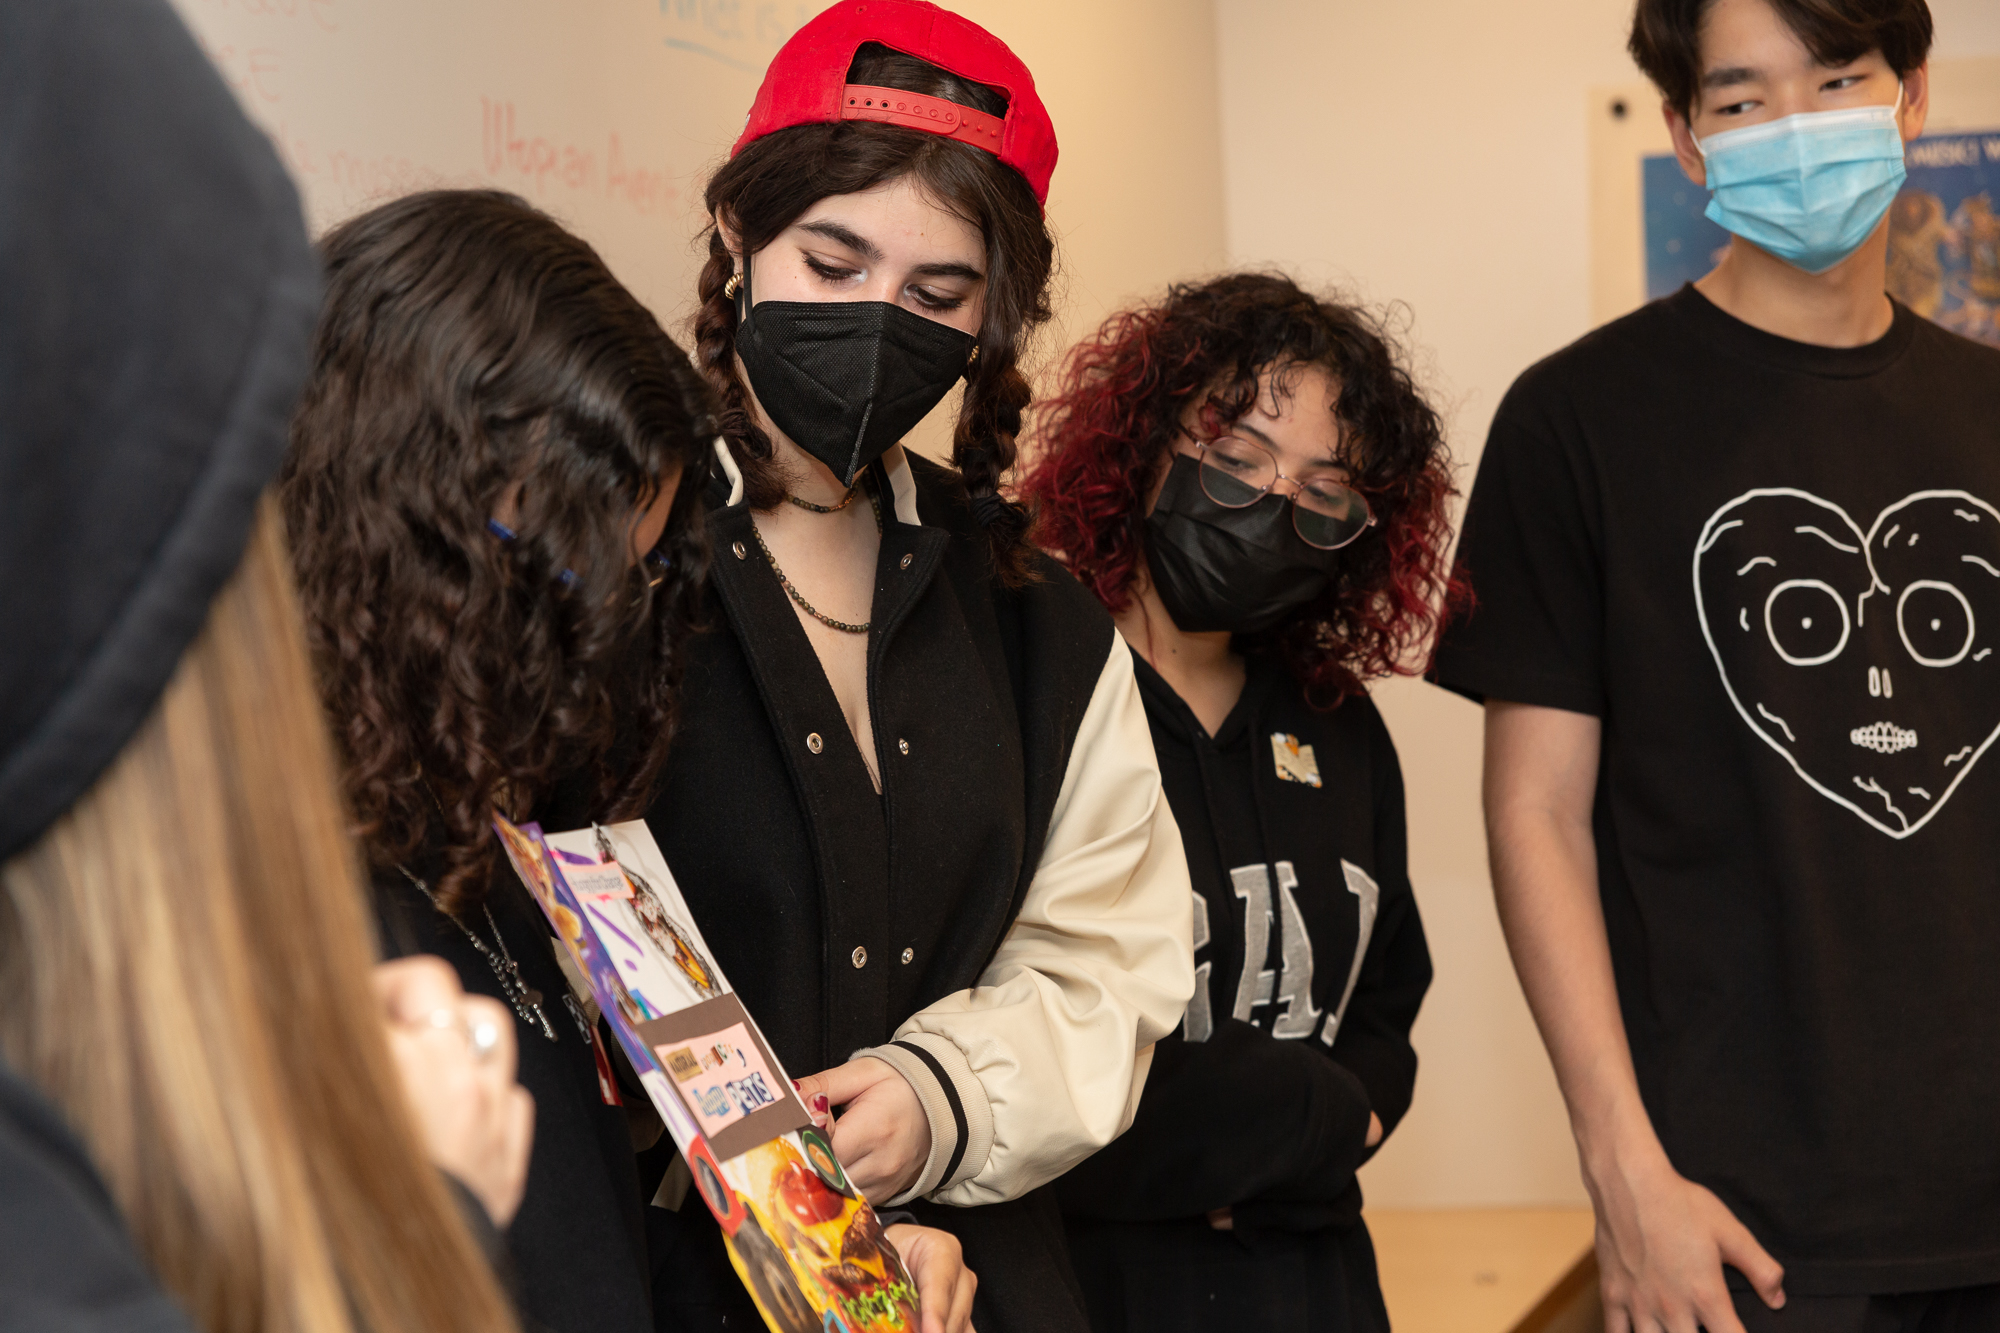 A group of students wearing face masks point at and observe a paper with collage work